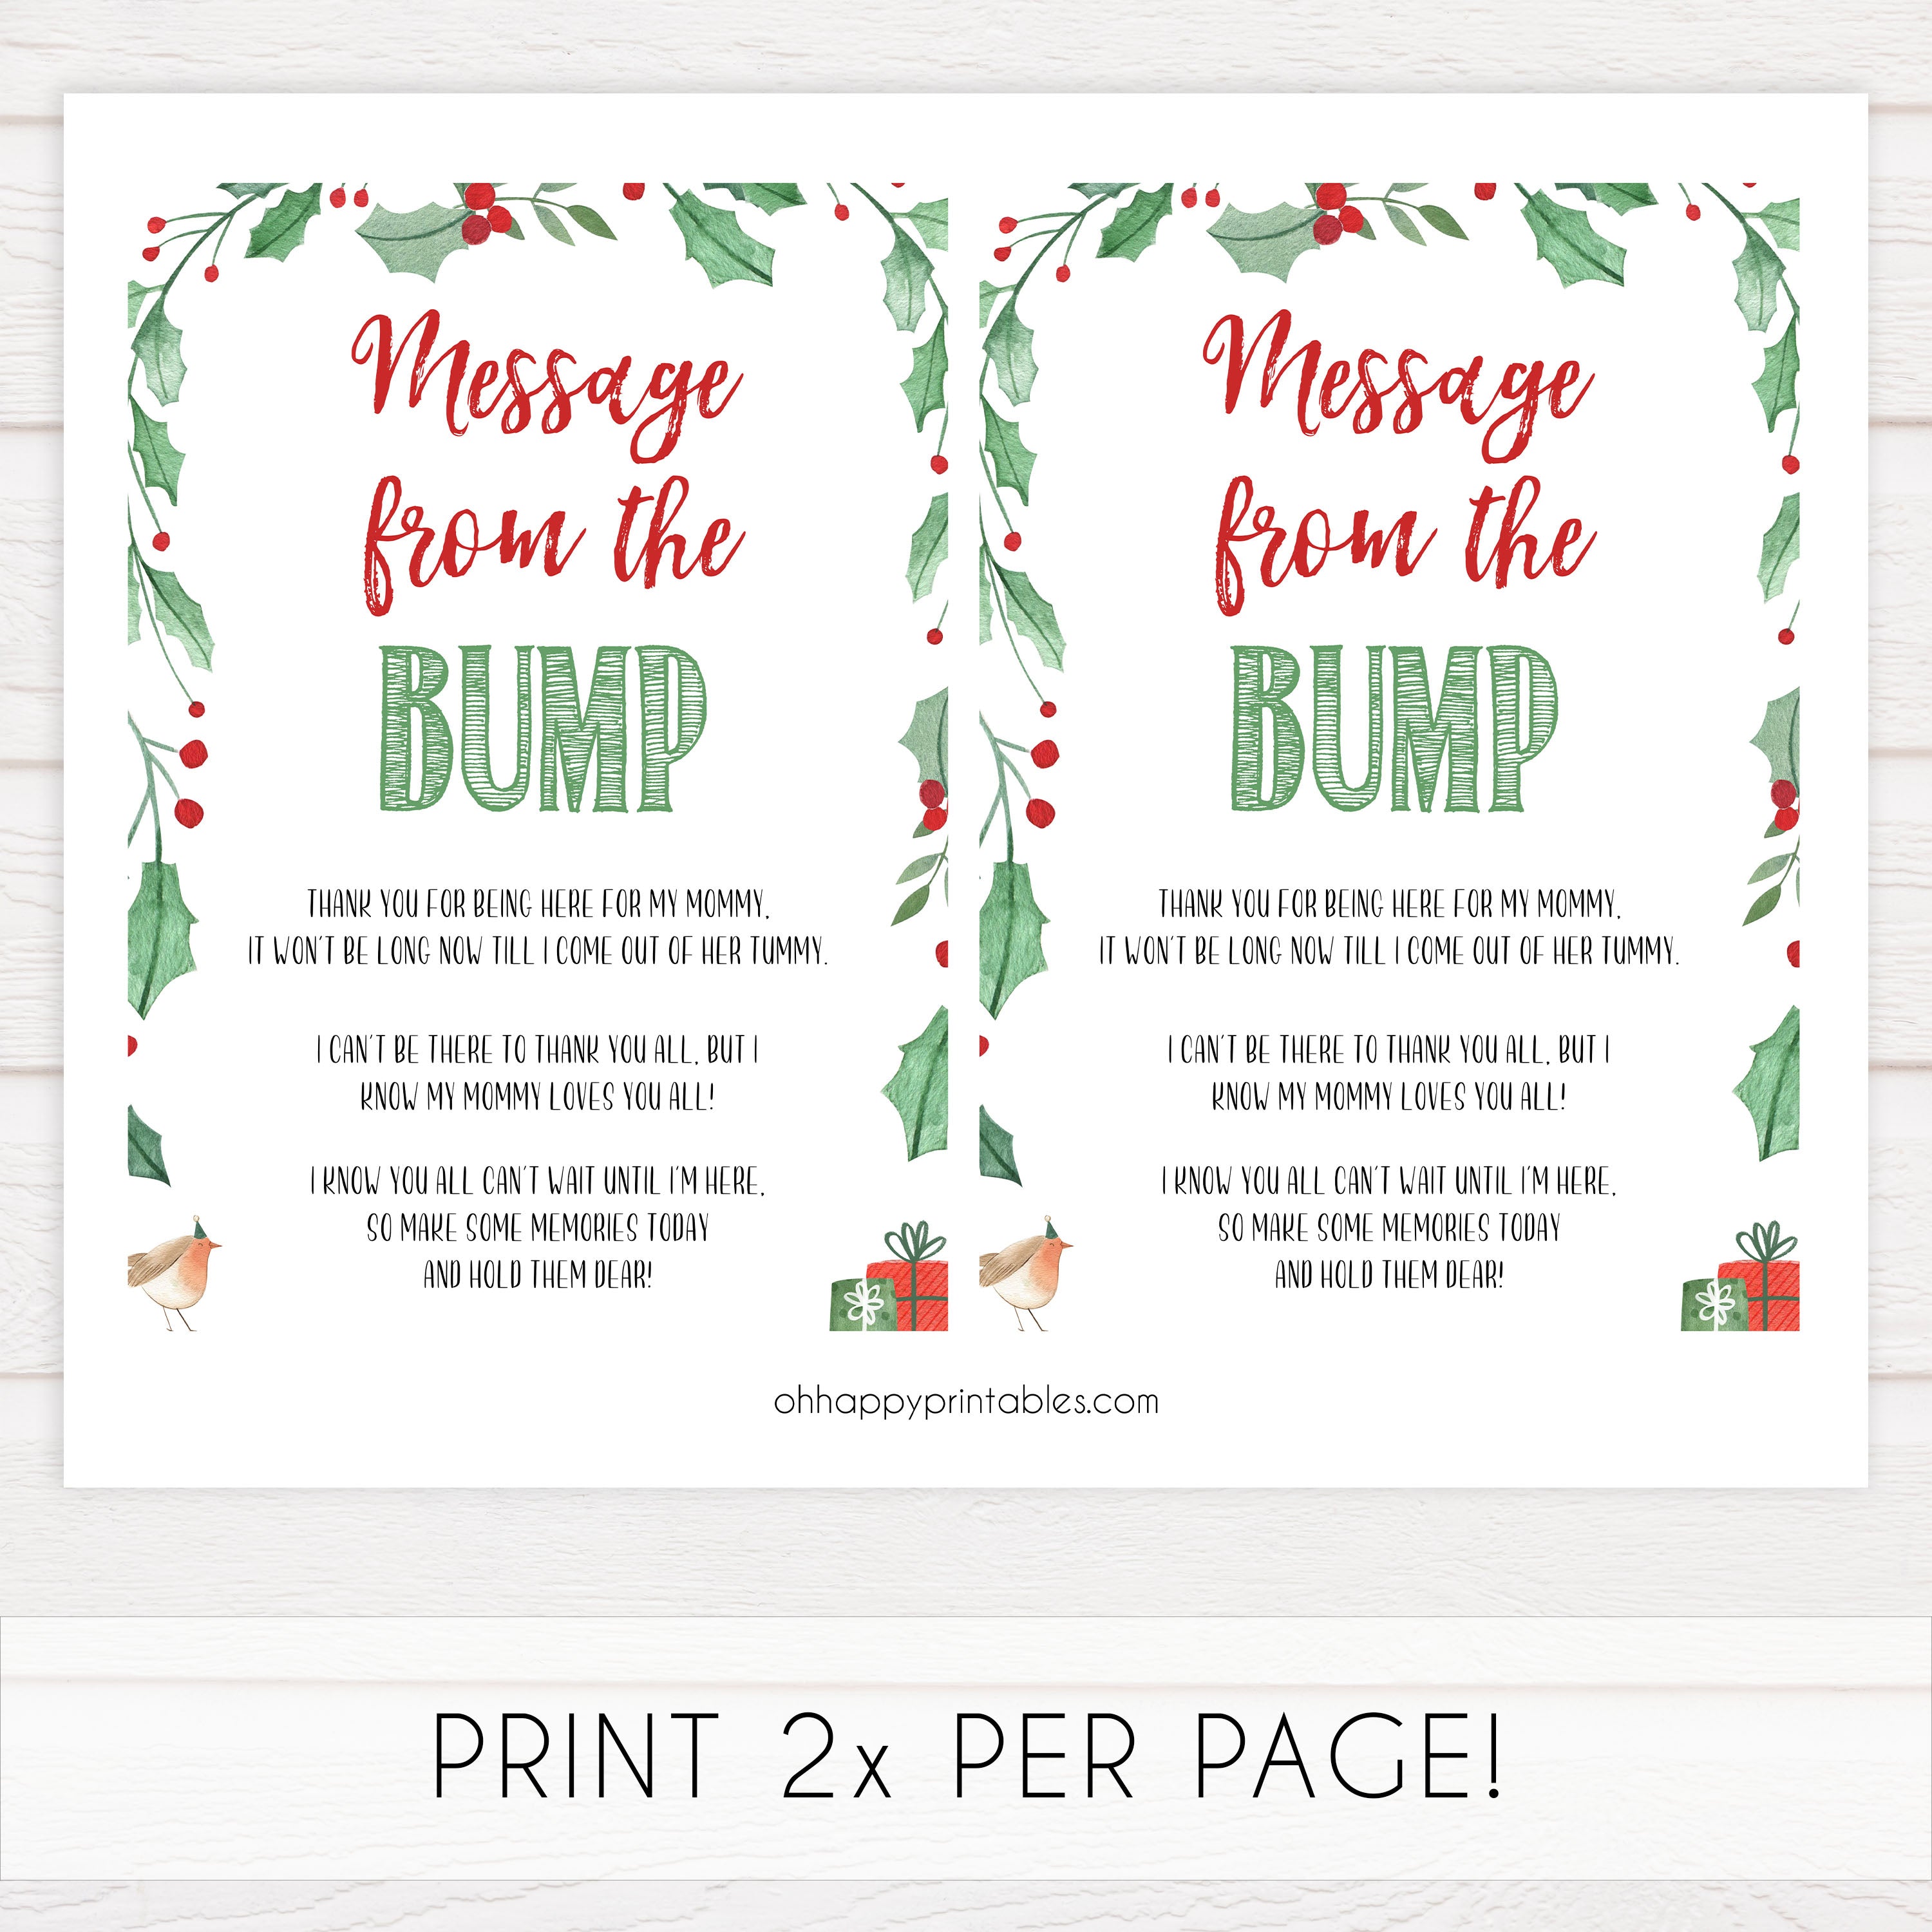 Christmas baby shower games, message from the bump, festive baby shower games, best baby shower games, top 10 baby games, baby shower ideas, baby shower games